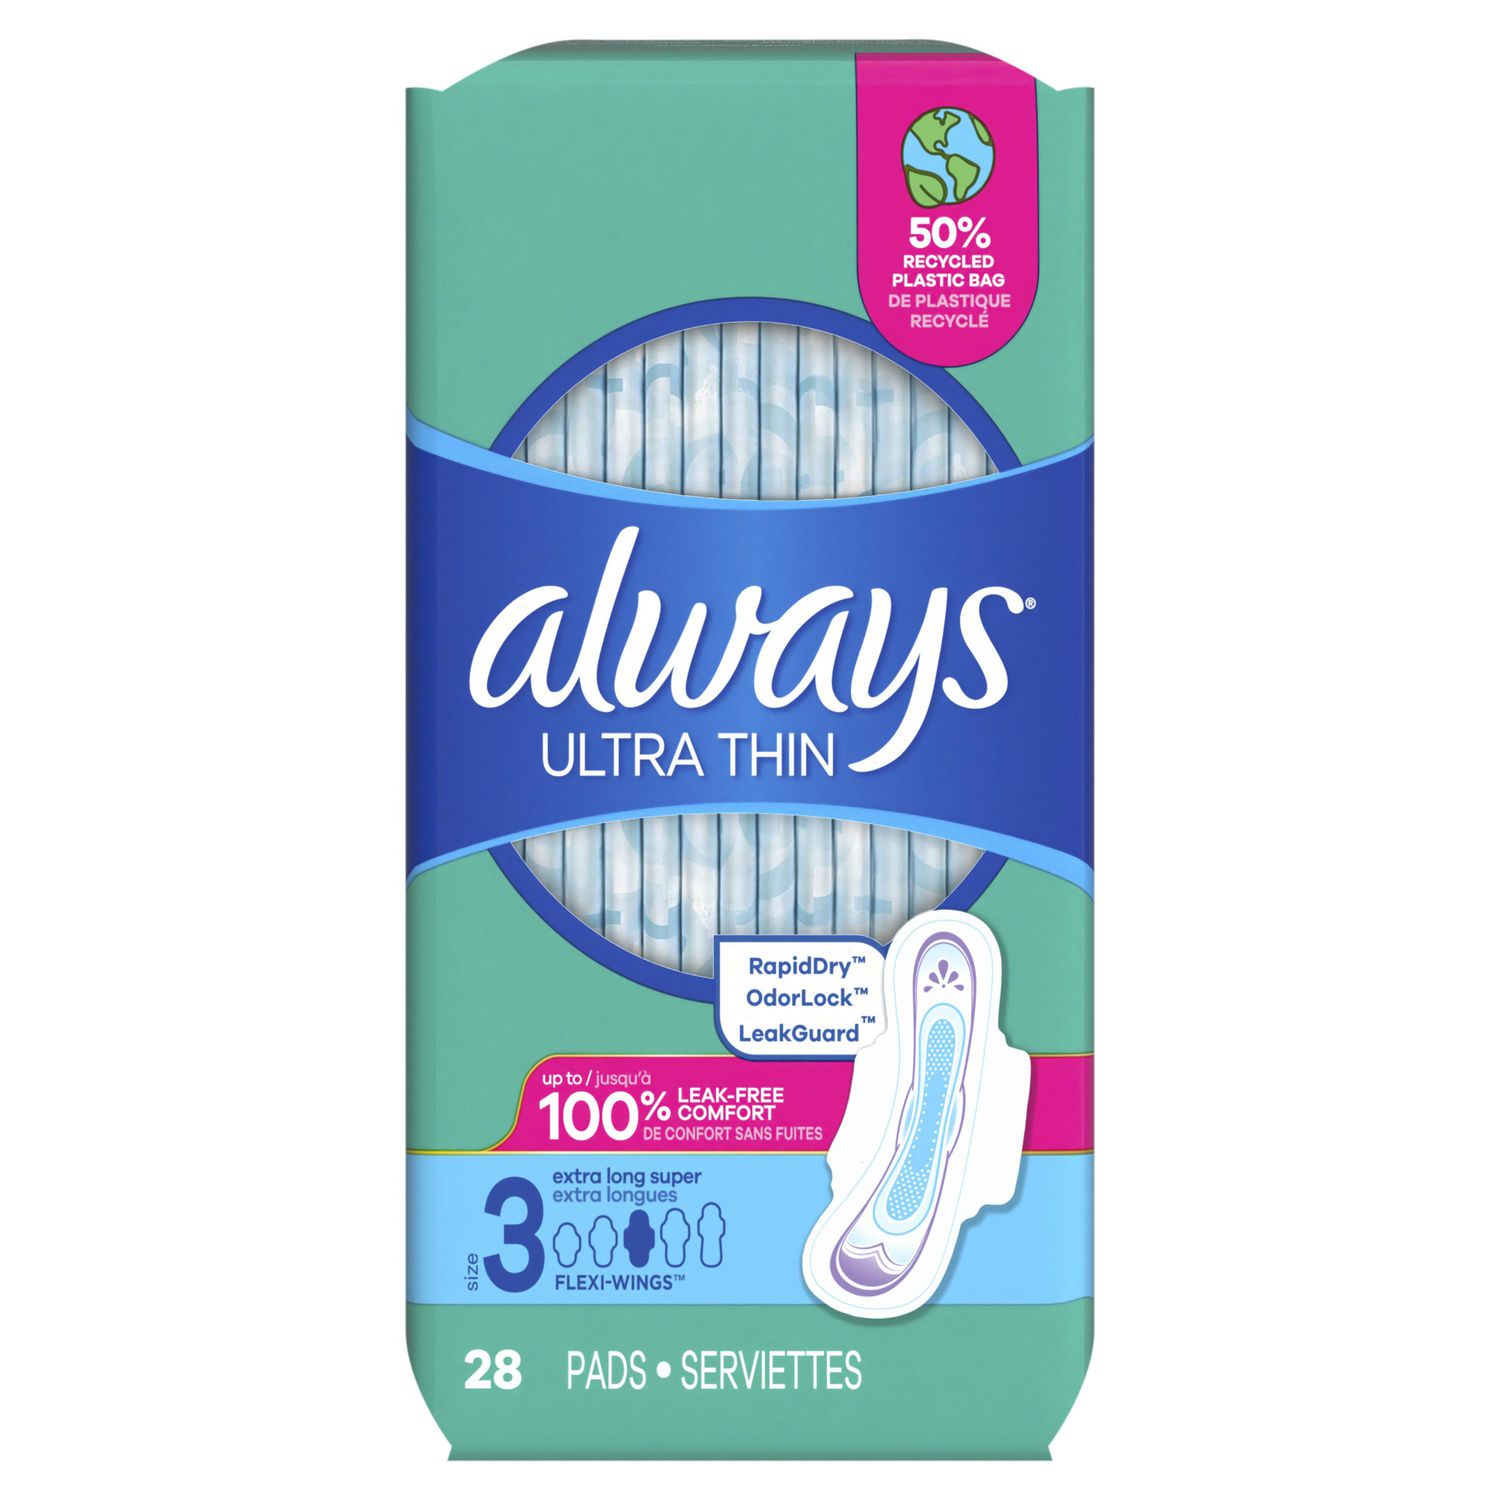 ALWAYS Ultra Night With Wings (Size 3) 10 Pads, Incontinence & Bladder